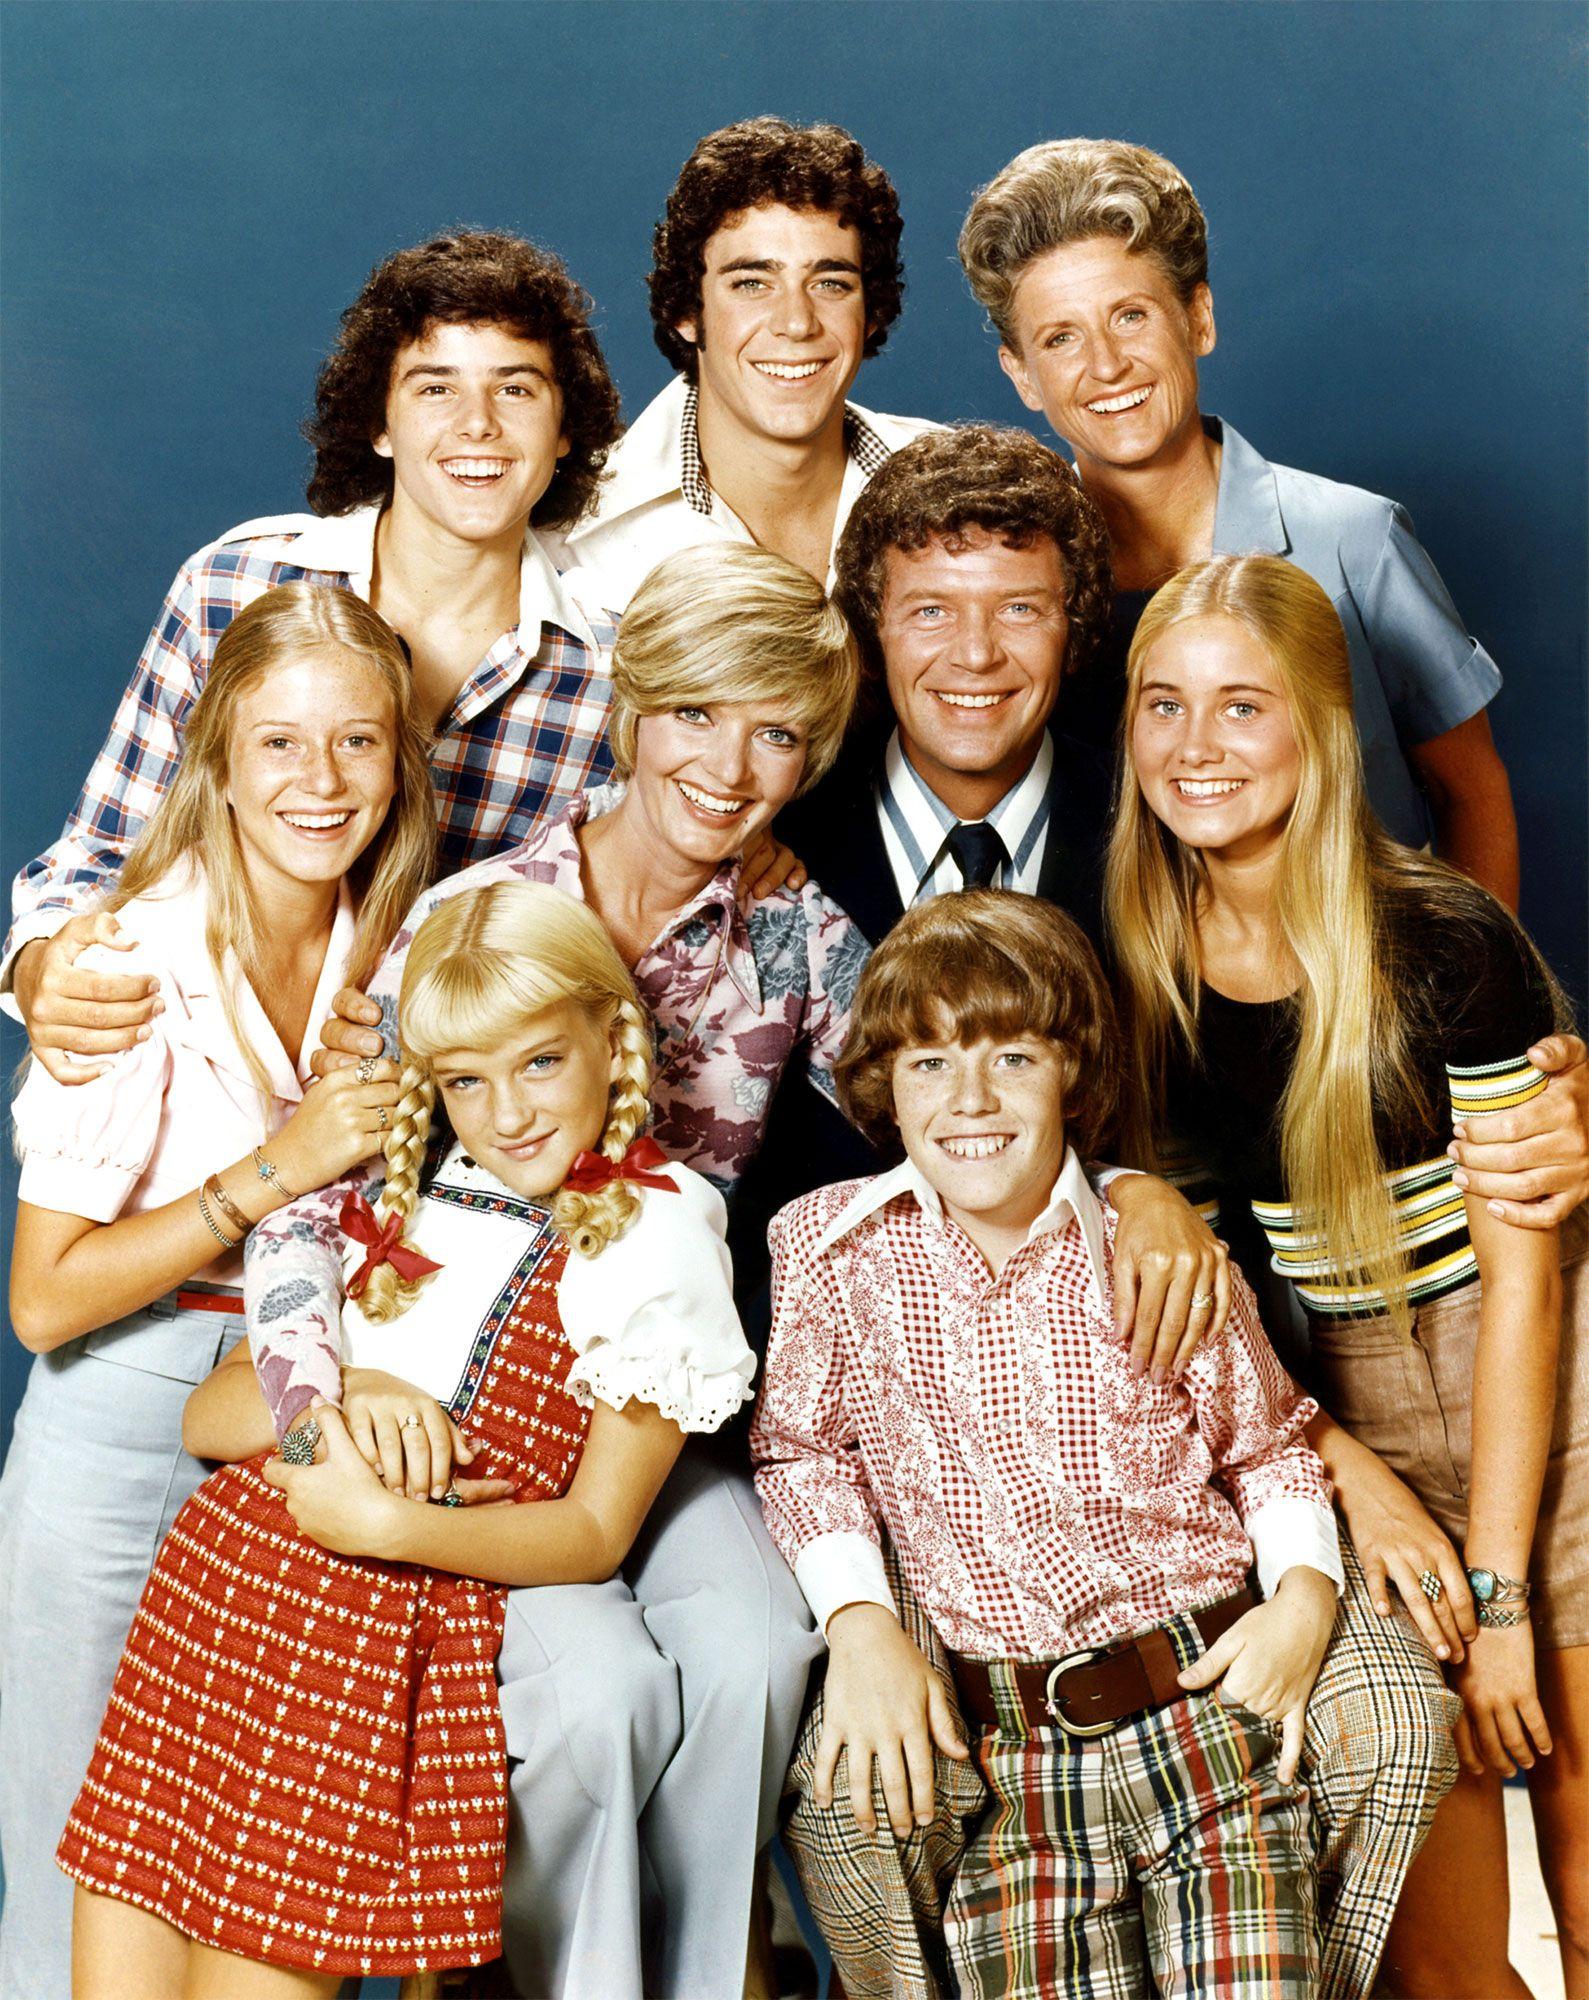 Brady Bunch House Demolished? Home May Be Torn Down